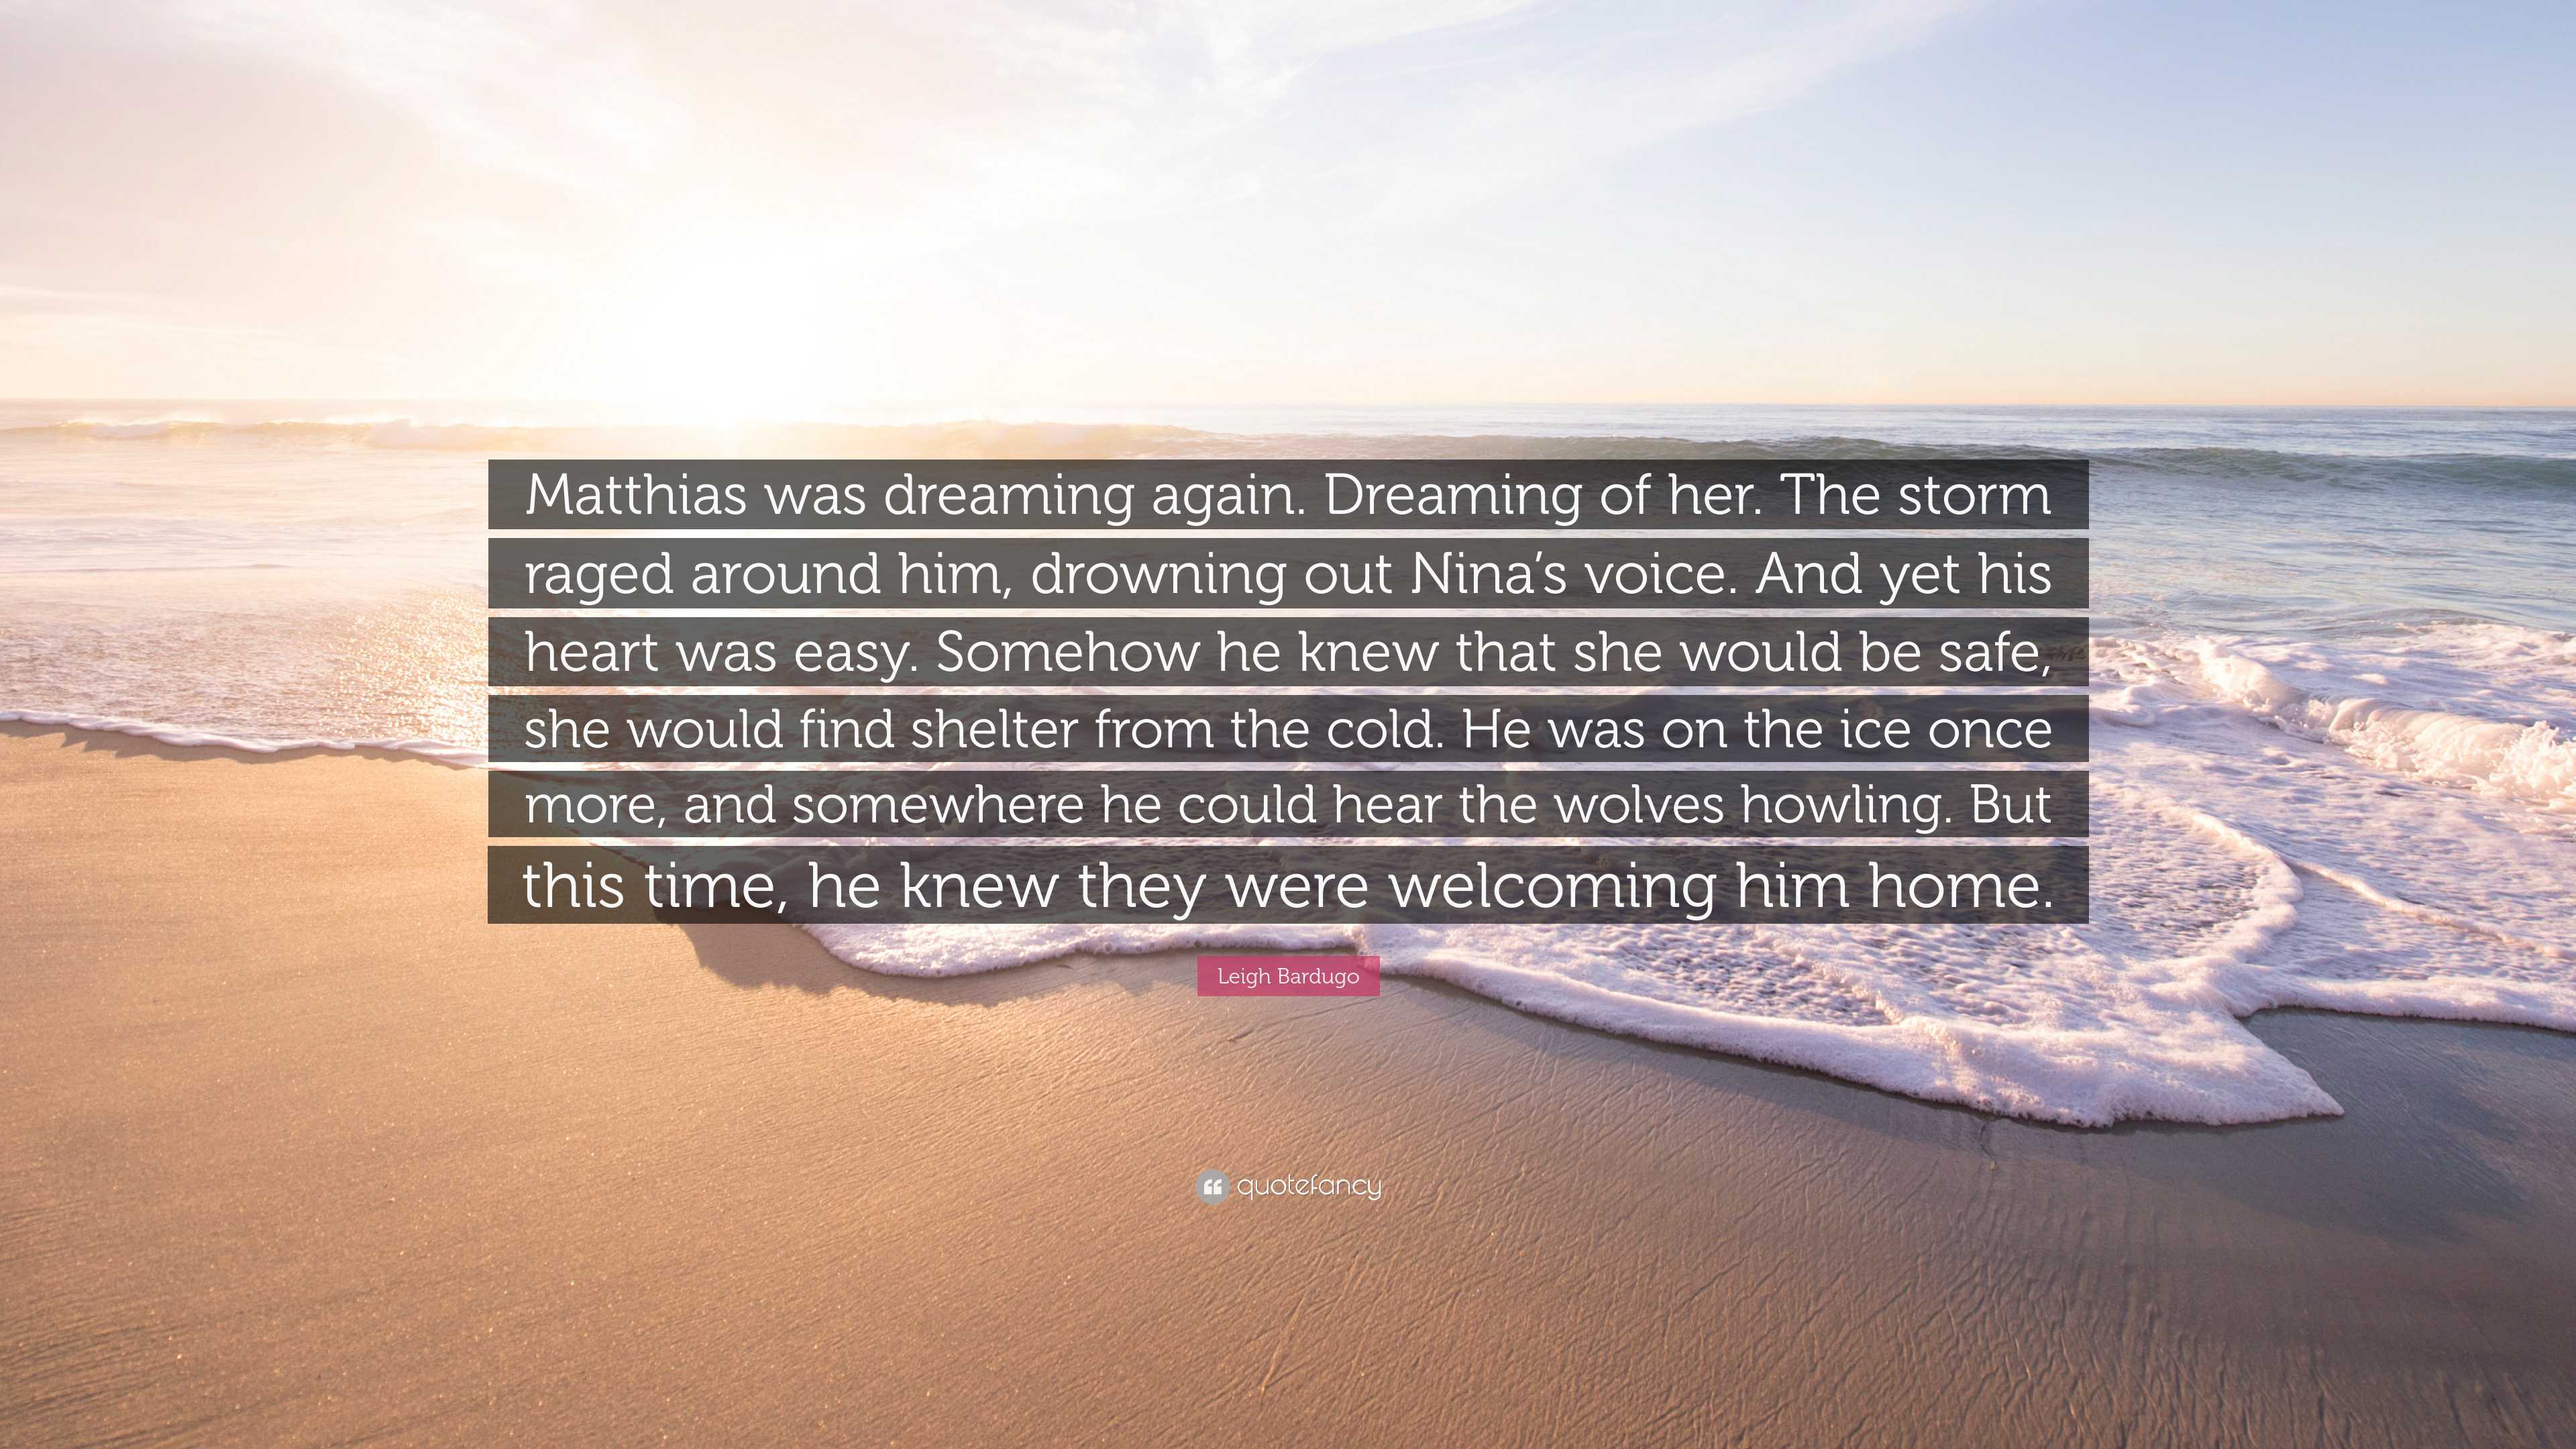 What if we've all been dreaming?. Imagine you were dreaming, and…, by Matt, nestedmind